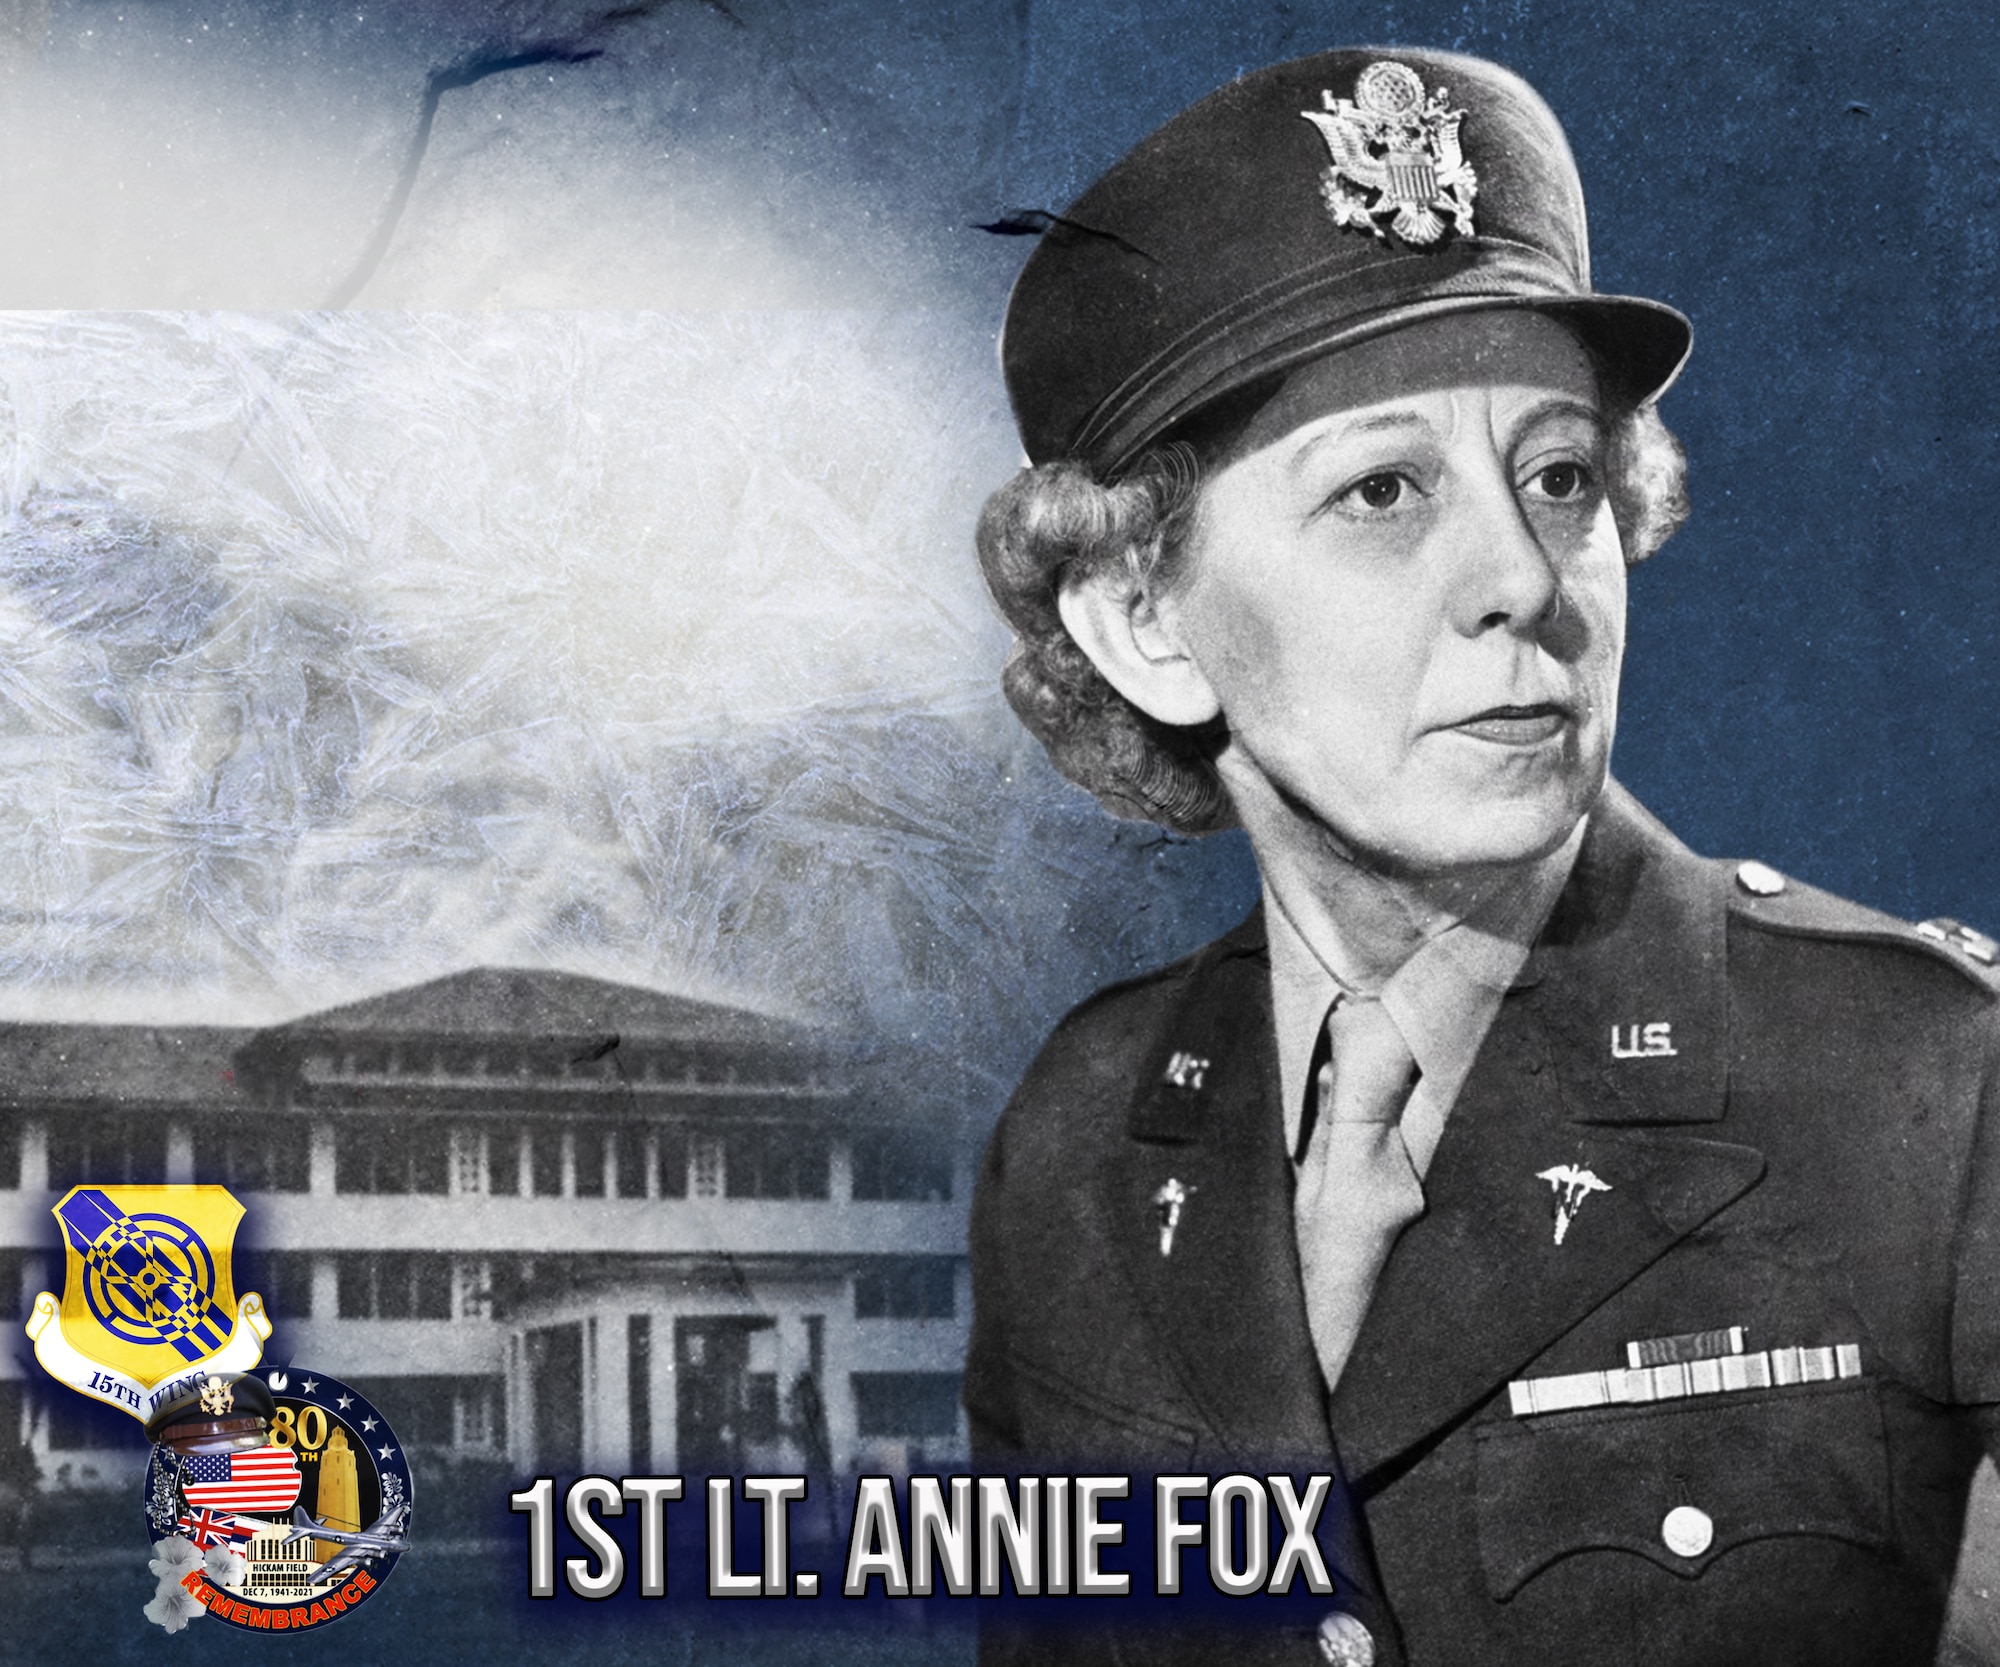 This is a graphic illustration of Lt. Annie Fox. Lt. Fox assembled a team of nurses and volunteers to help the wounded during the attacks on Dec. 7, 1941. Her actions led her to being the first female to be awarded the Purple Heart. (U.S. Air Force graphic by Airman 1st Class Makensie Cooper)